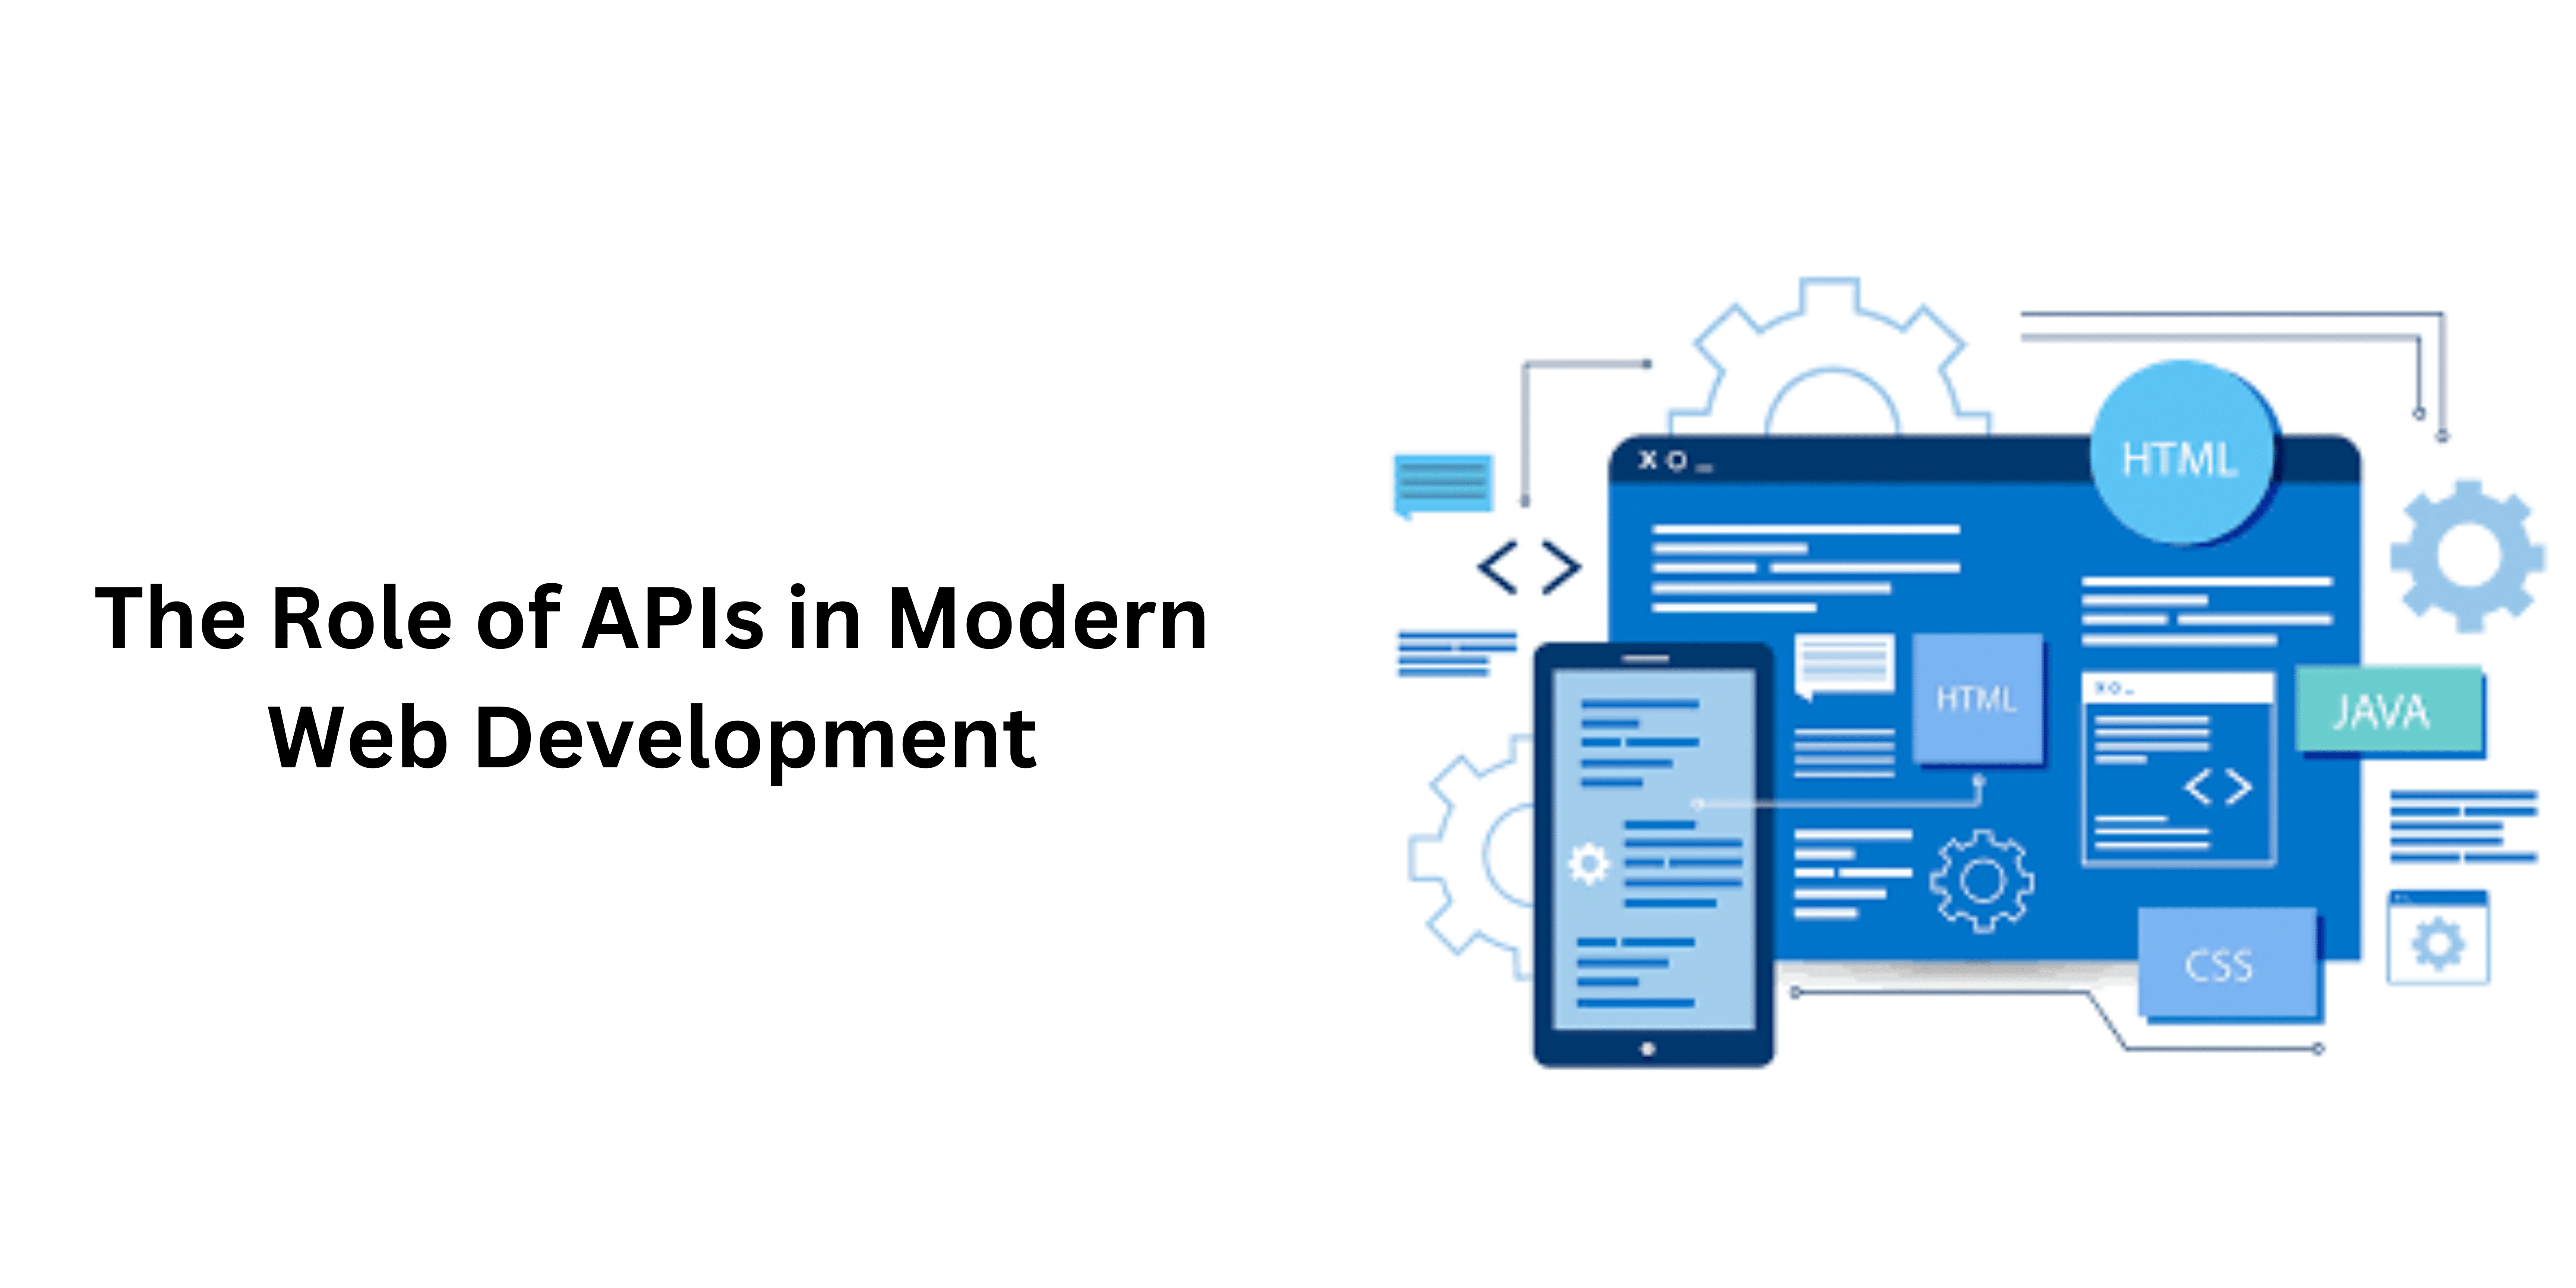 The Role of APIs in Modern Web Development